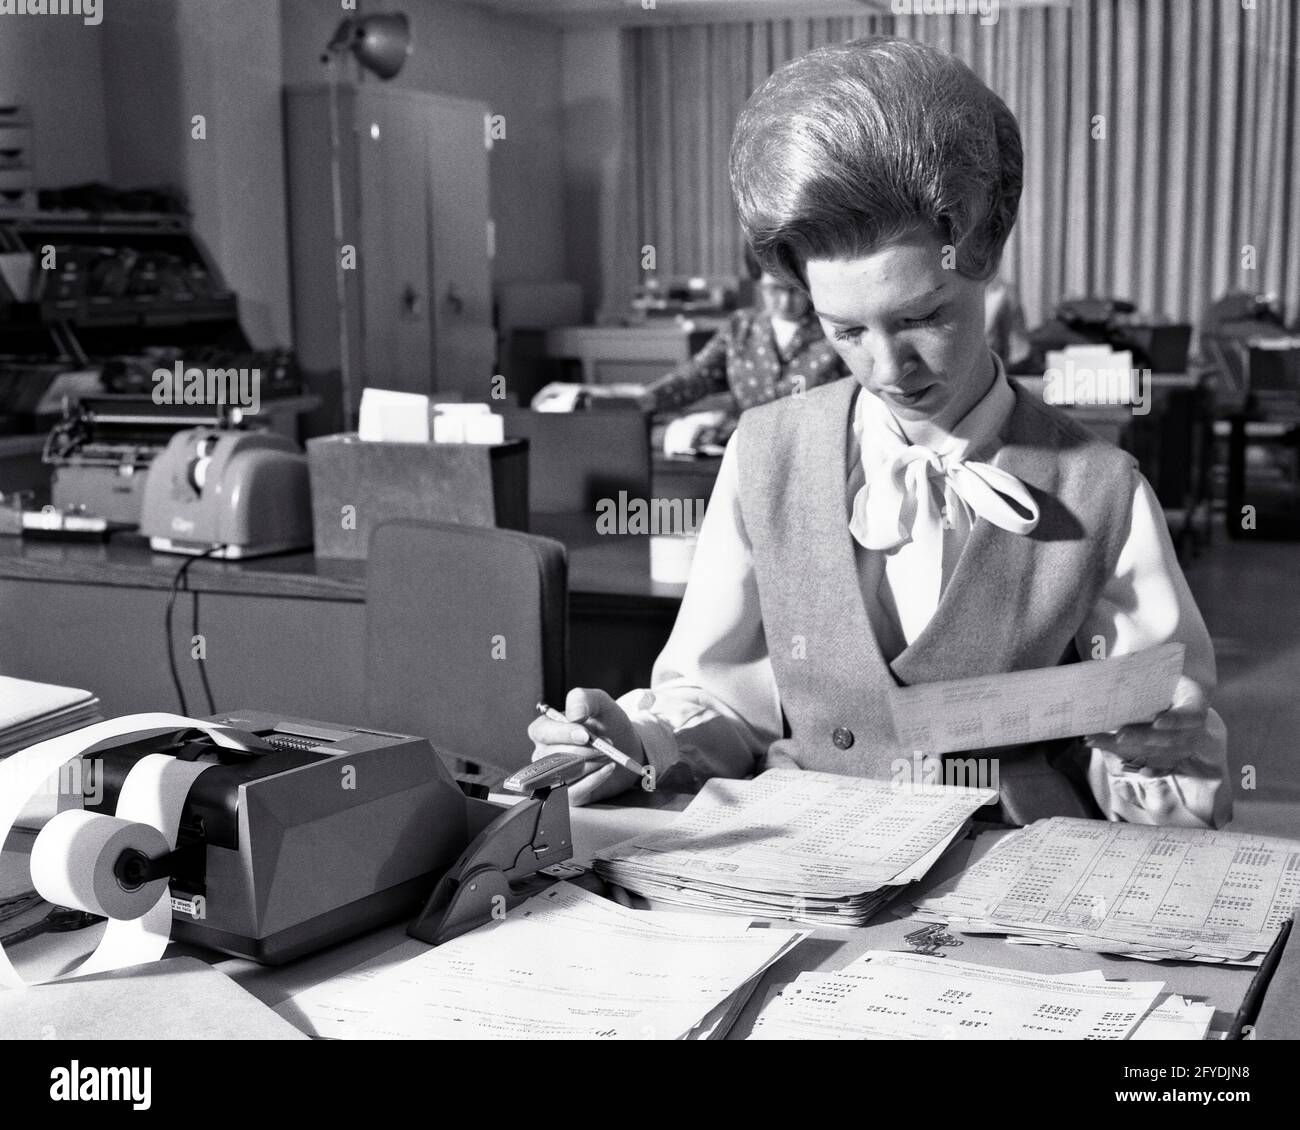 1960s OFFICE WORKER WOMAN WITH TEASED BIG HAIR HAIRSTYLE WORKING AT DESK WITH ADDING MACHINE AND HUGE PILES OF PAPERS - o2399 HAR001 HARS COPY SPACE HALF-LENGTH LADIES PERSONS PROFESSION B&W BEEHIVE SKILL OCCUPATION OFFICES SKILLS ADDING AND CAREERS HAIRSTYLE BOOKKEEPER LABOR OFFICE WORKER AT EMPLOYMENT OCCUPATIONS GAL FRIDAY ADMINISTRATOR SECRETARIES STYLISH EMPLOYEE AMANUENSIS INTENSE MID-ADULT MID-ADULT WOMAN SOLUTIONS TEASED BLACK AND WHITE BOUFFANT CAUCASIAN ETHNICITY CLERICAL HAR001 LABORING OLD FASHIONED Stock Photo